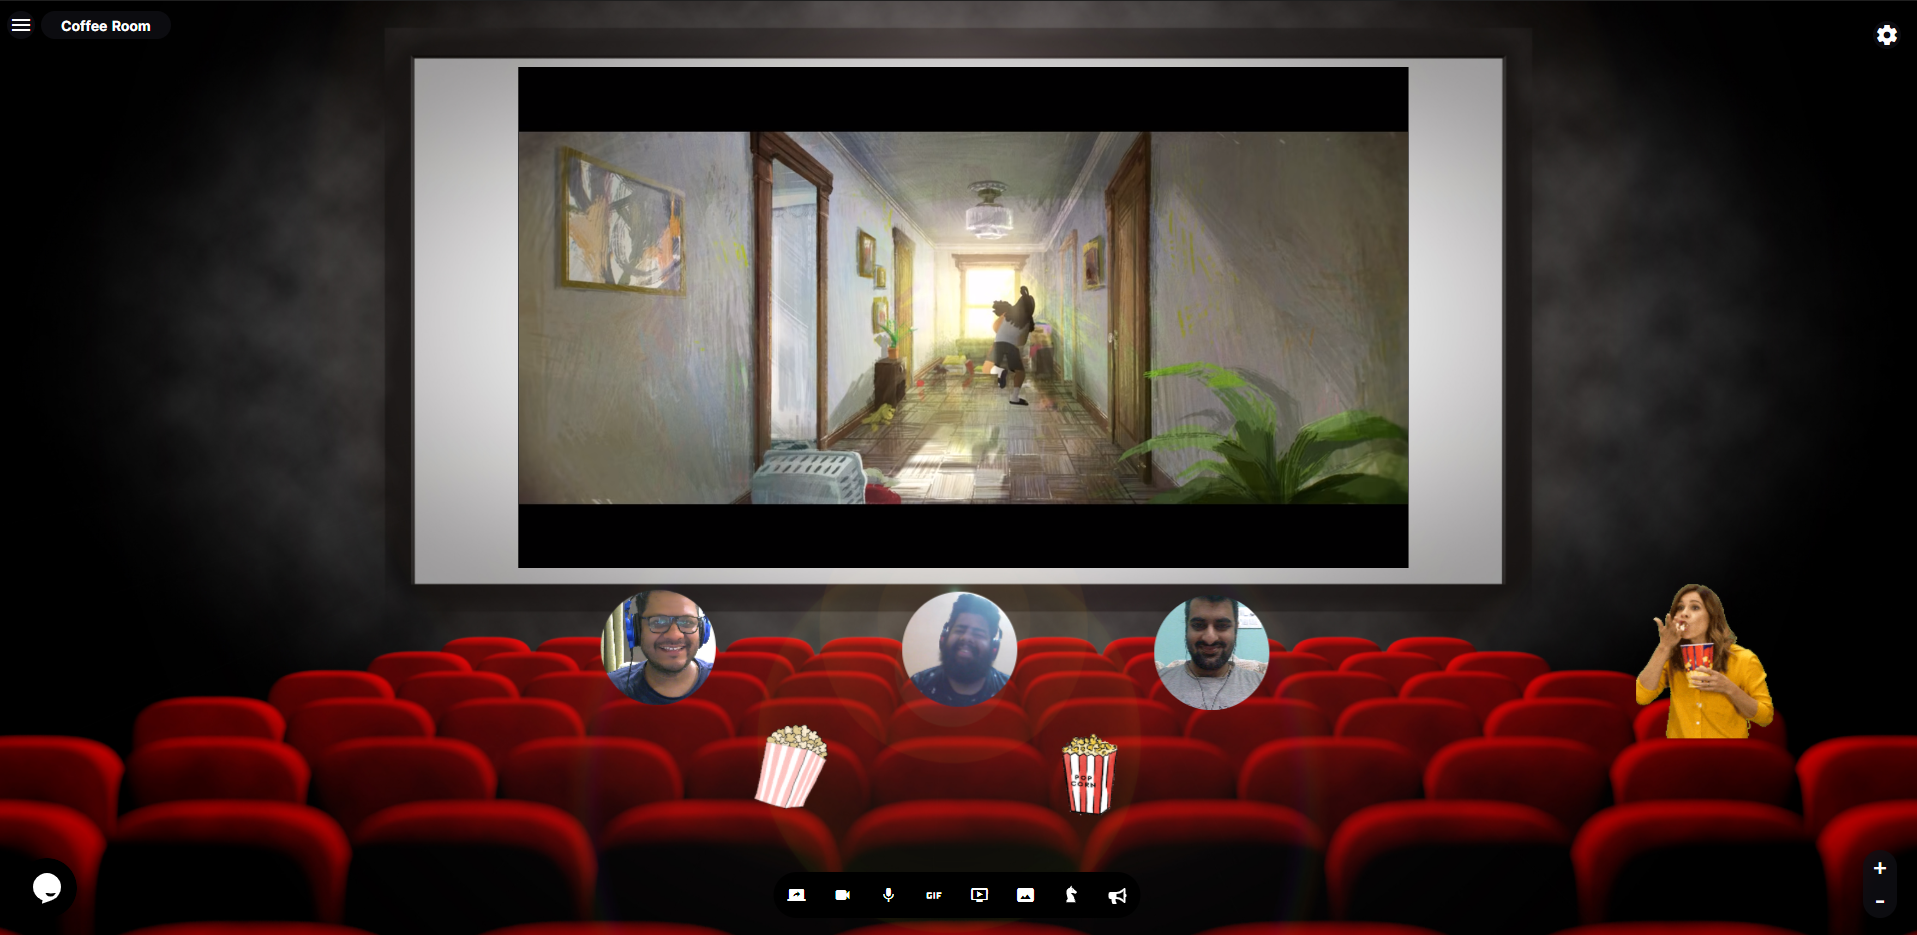 A virtual movie screen shows a film in the background while three friends watch via video call. 